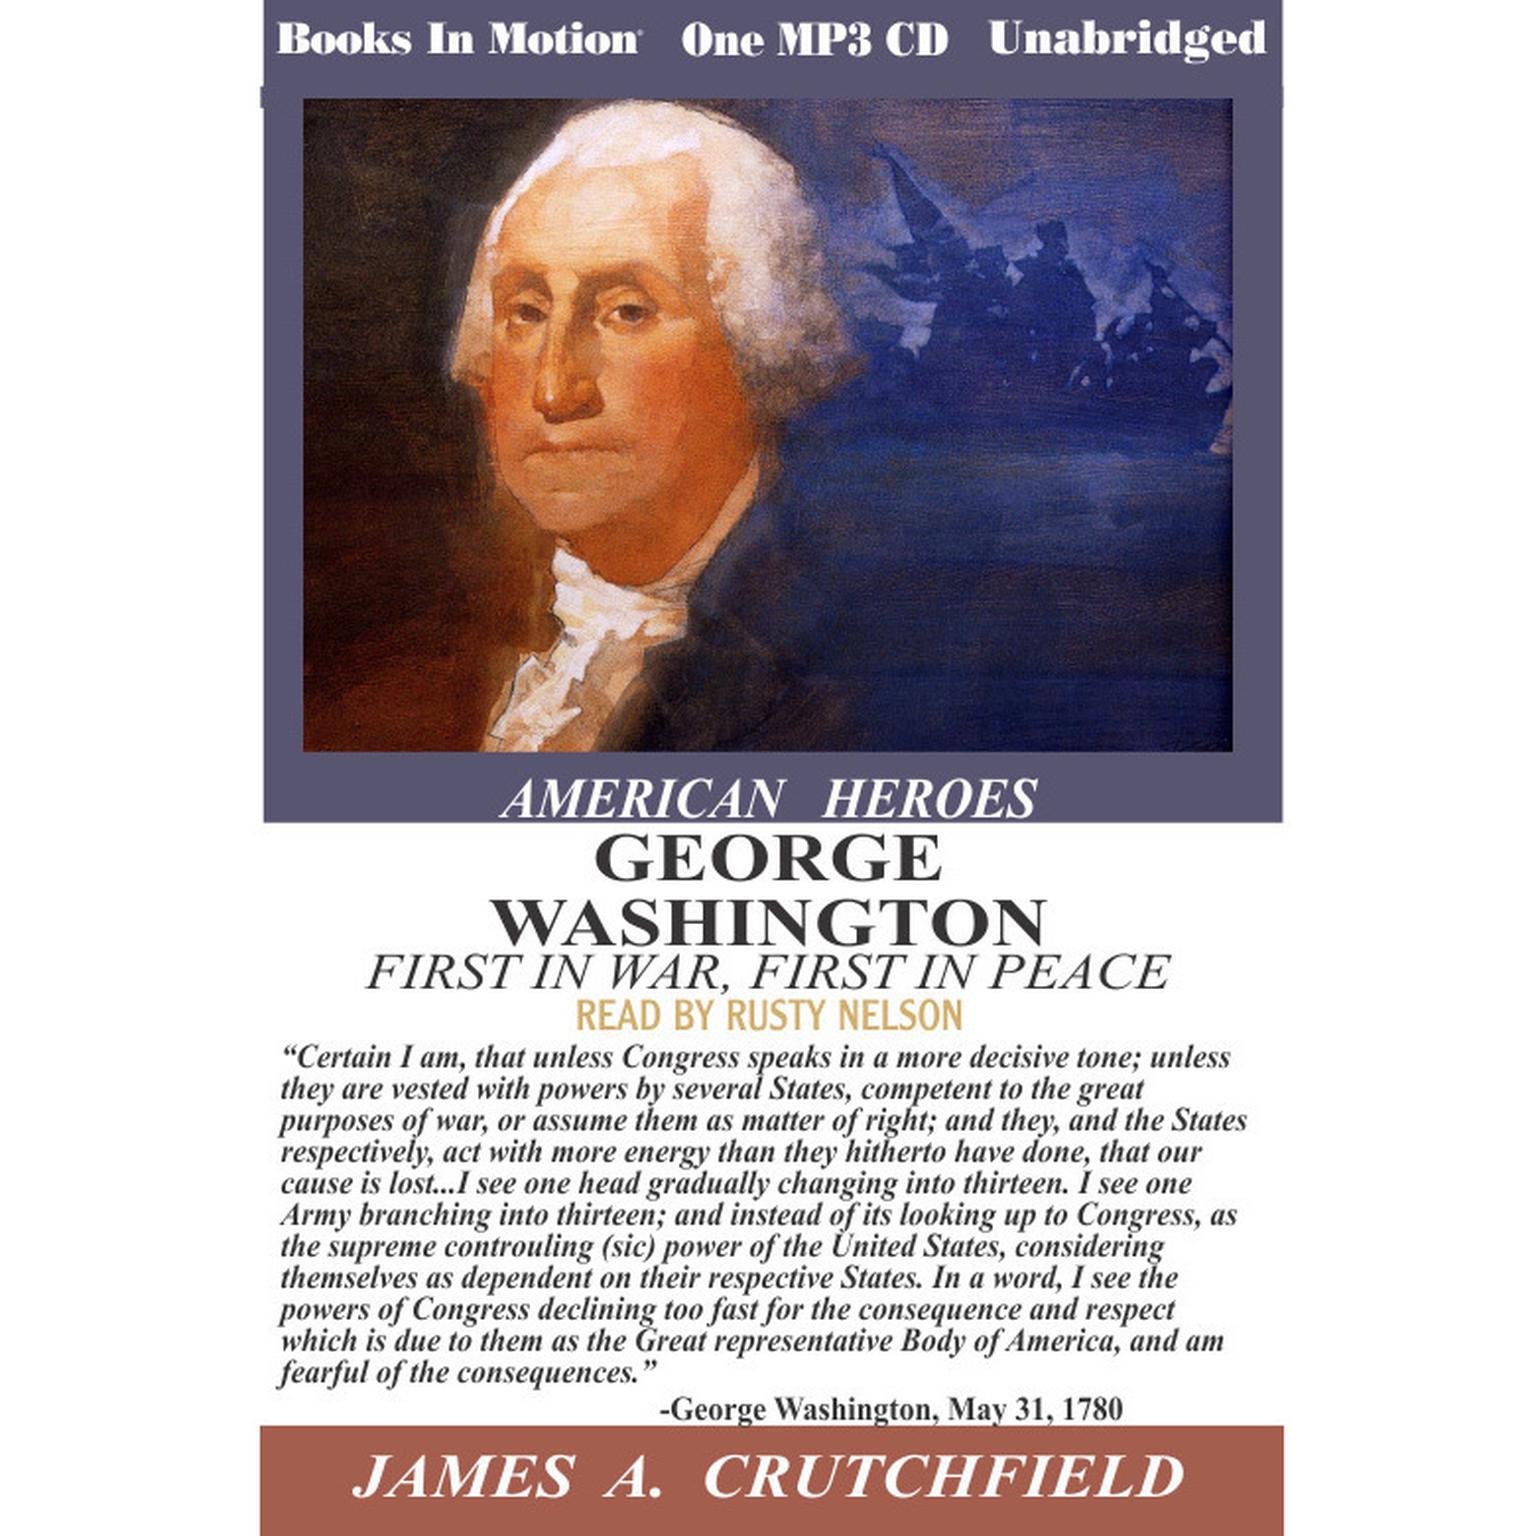 George Washington, First in War First in Peace Audiobook, by James A Crutchfield